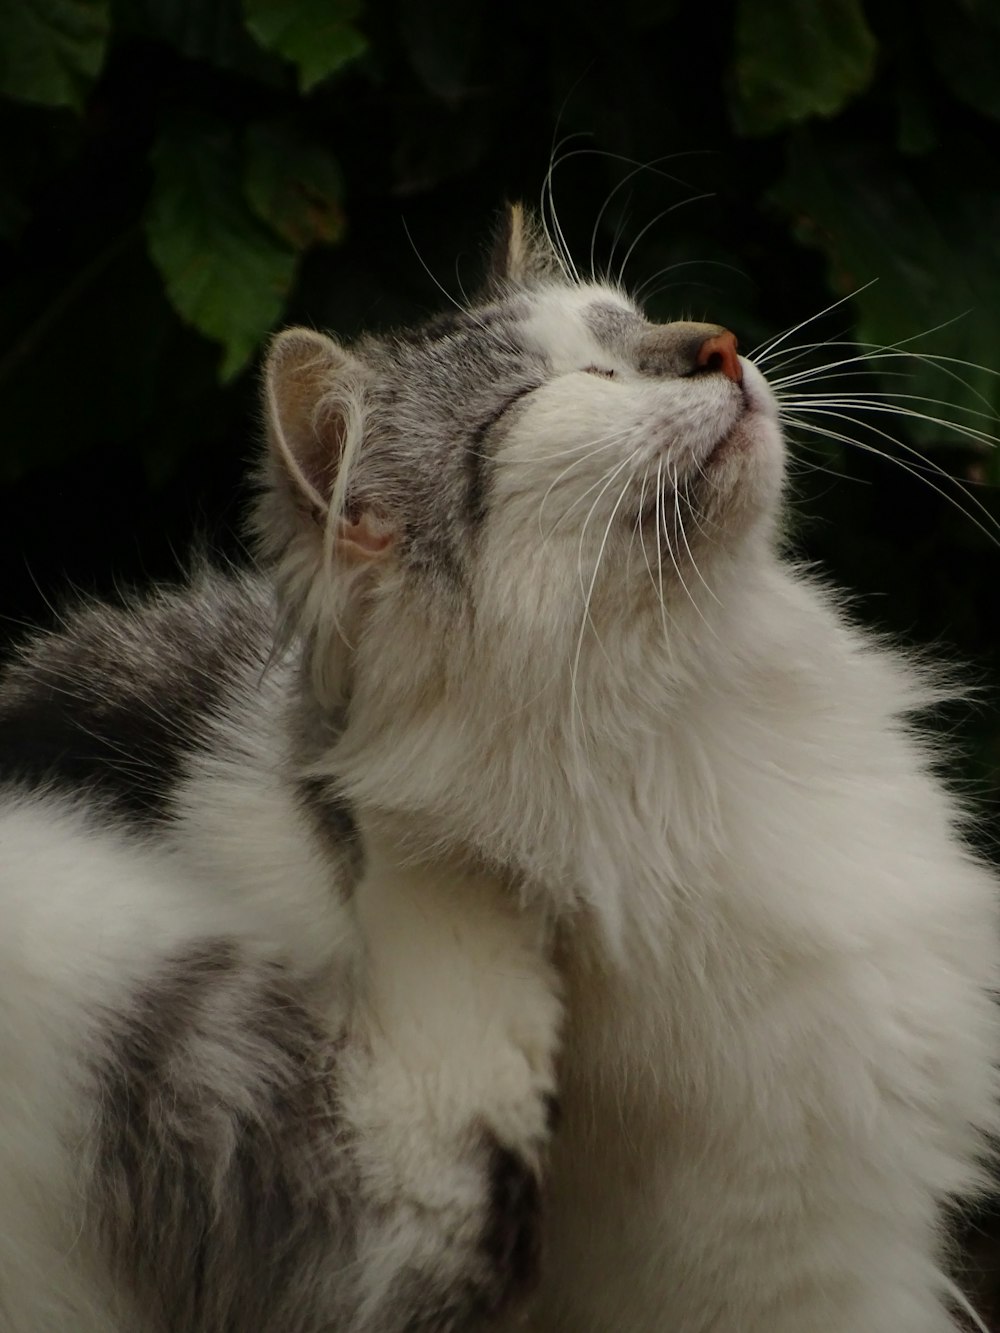 a cat licking another cat